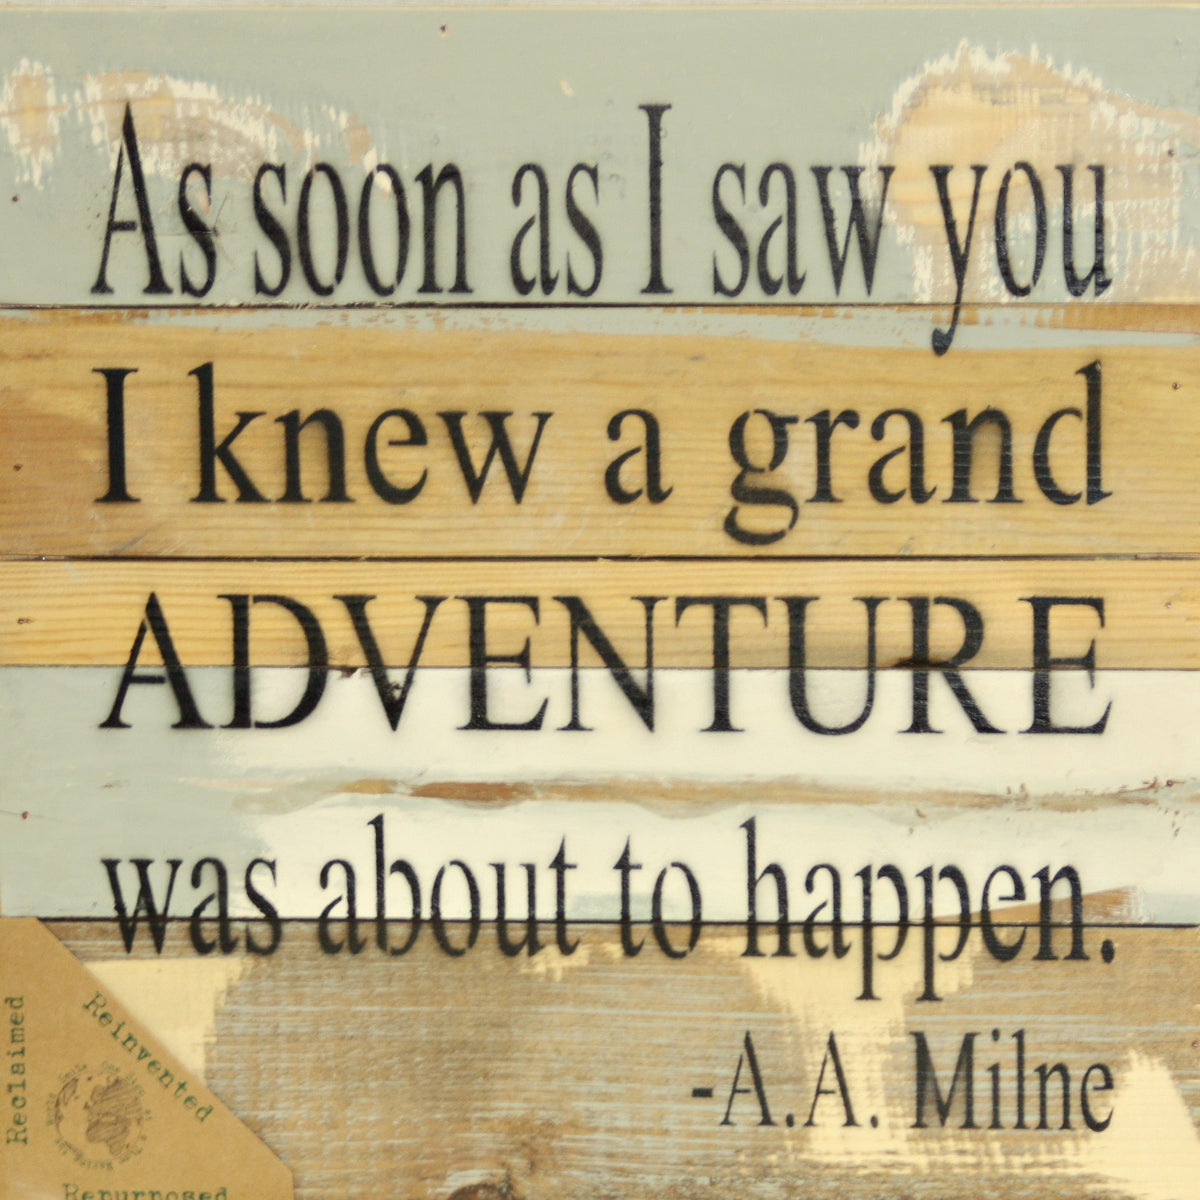 As soon as I saw you I knew a grand adventure was about to happen - A.A. Milne / 12x12 Reclaimed Wood Wall Art